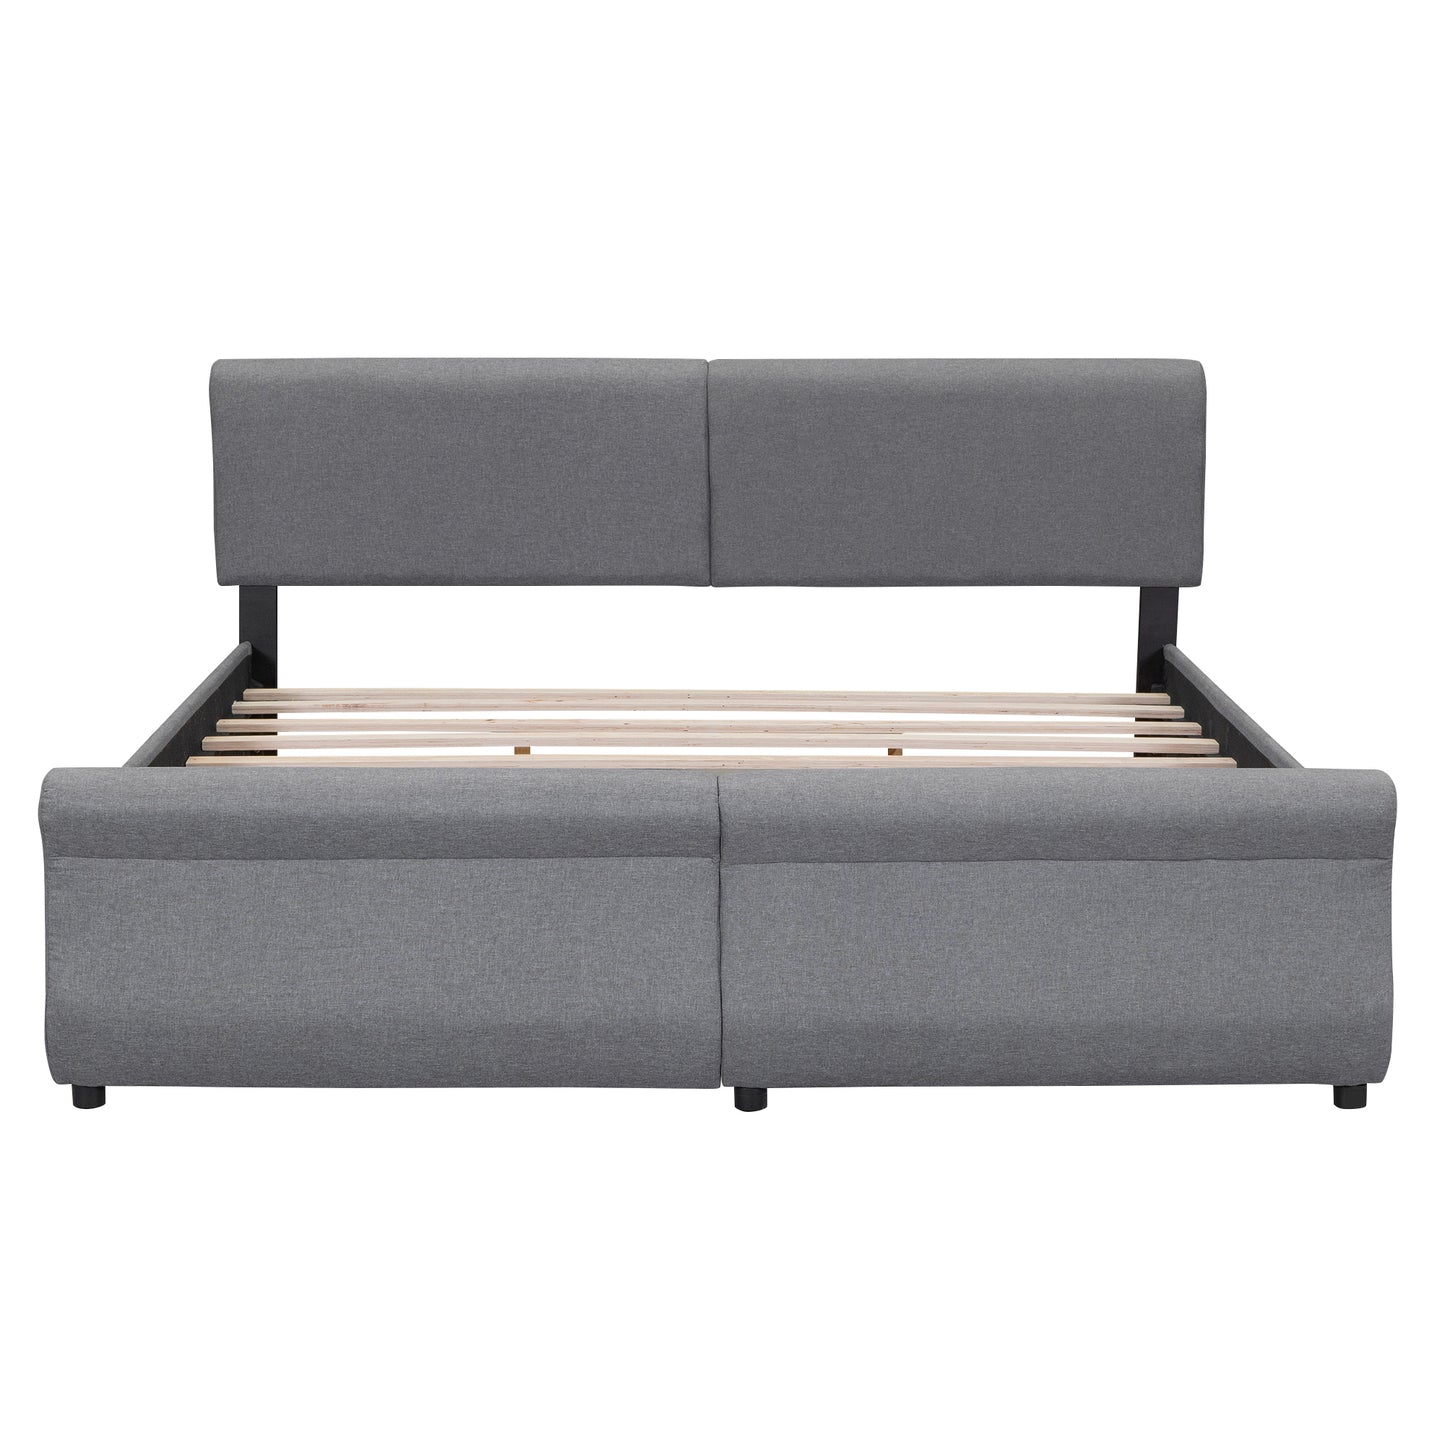 King Size Upholstery Platform Bed with Two Drawers, Gray